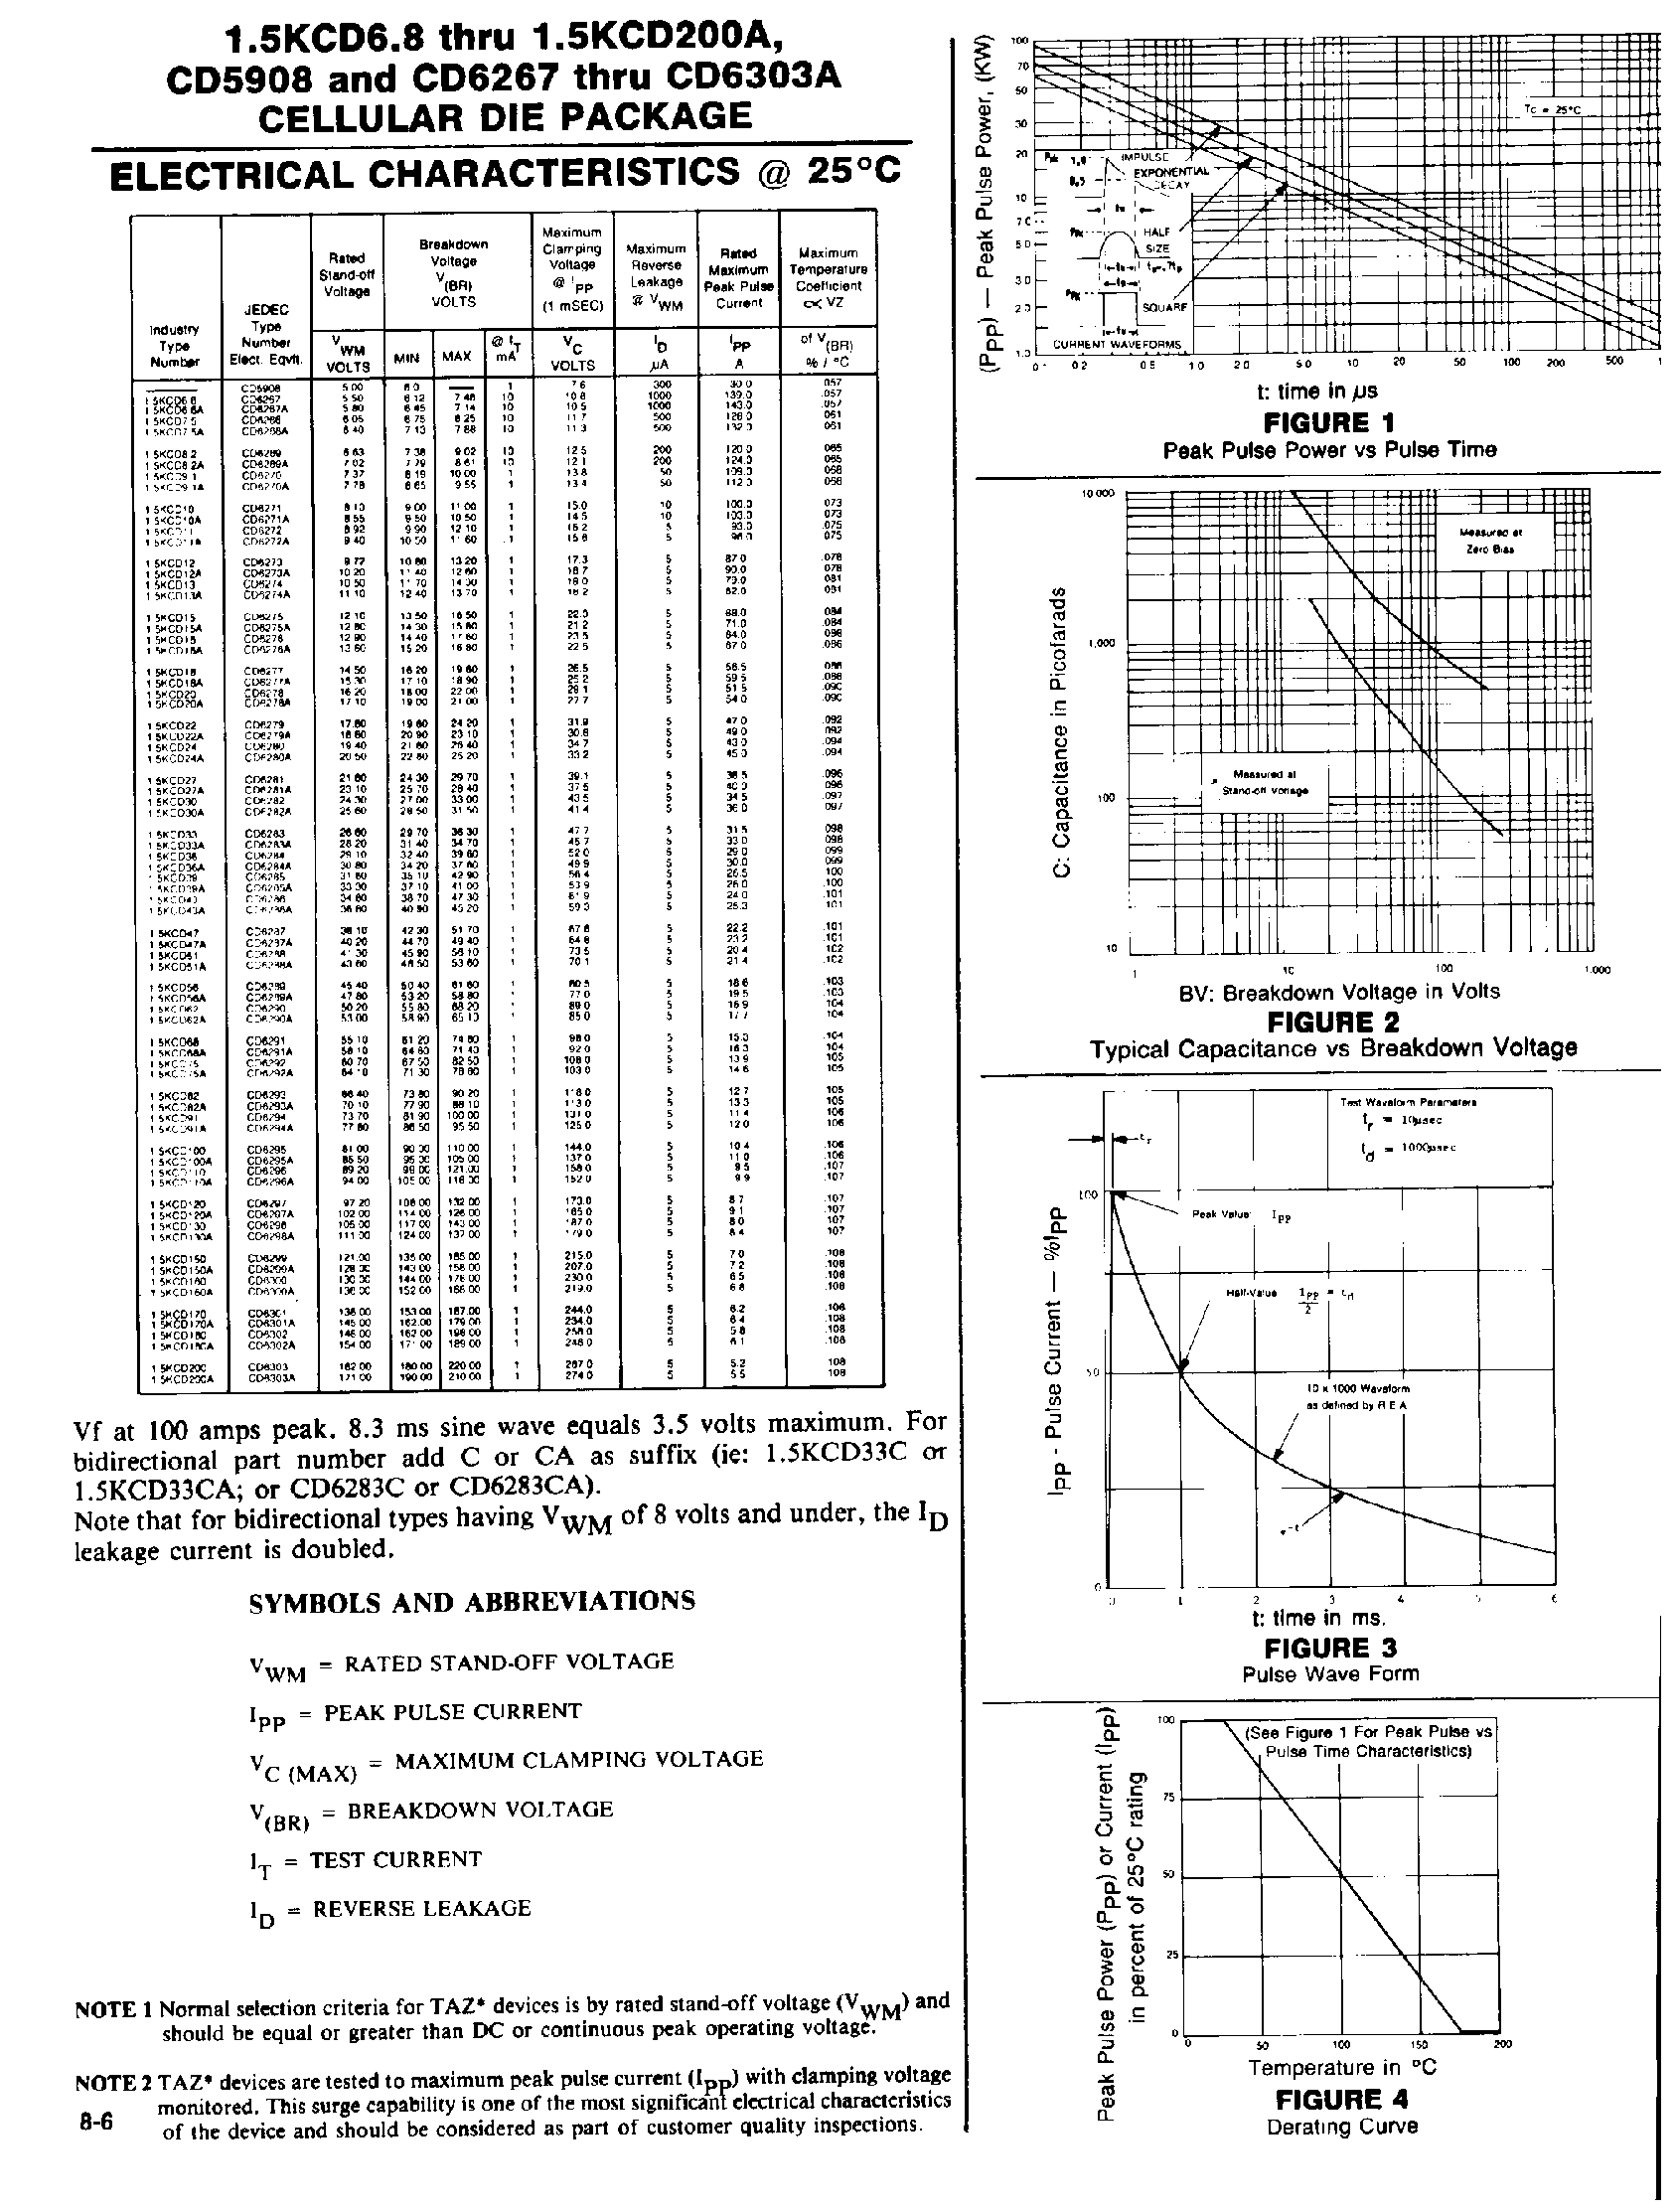 Datasheet CD6285A - Transient suppressor CELLULAR DIE PACKAGE page 2